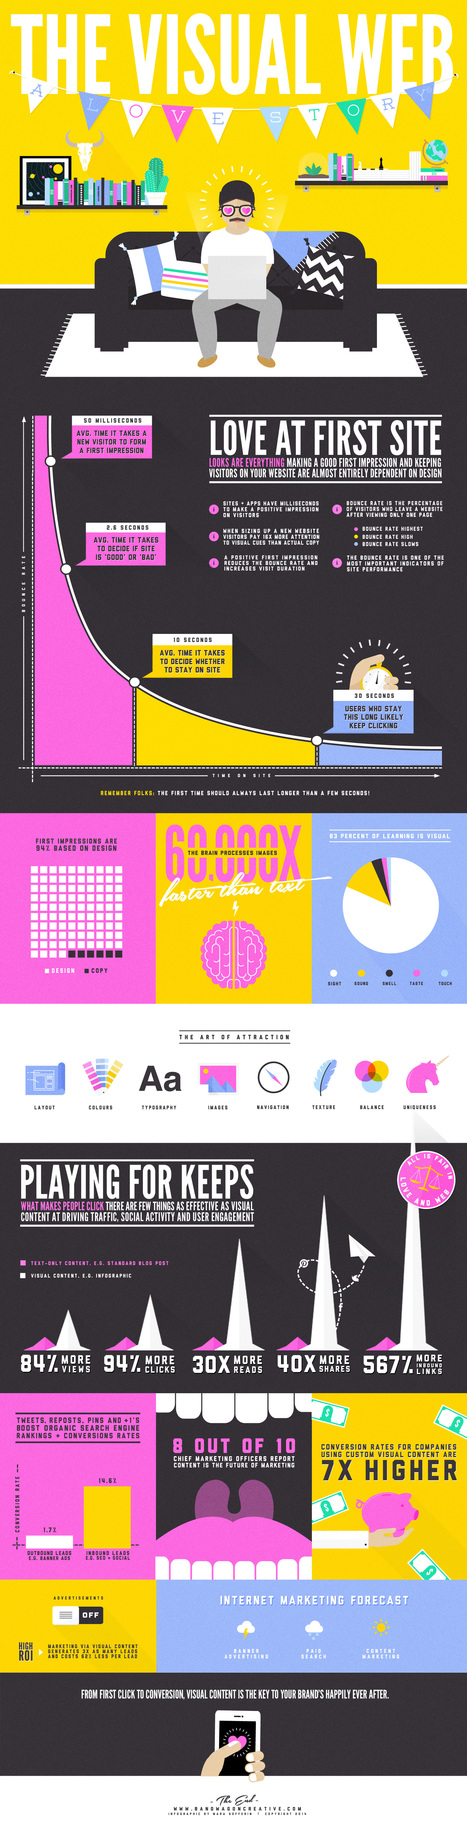 Why Visual Content Is the Key to Conversion #INFOGRAPHIC | Business Improvement and Social media | Scoop.it